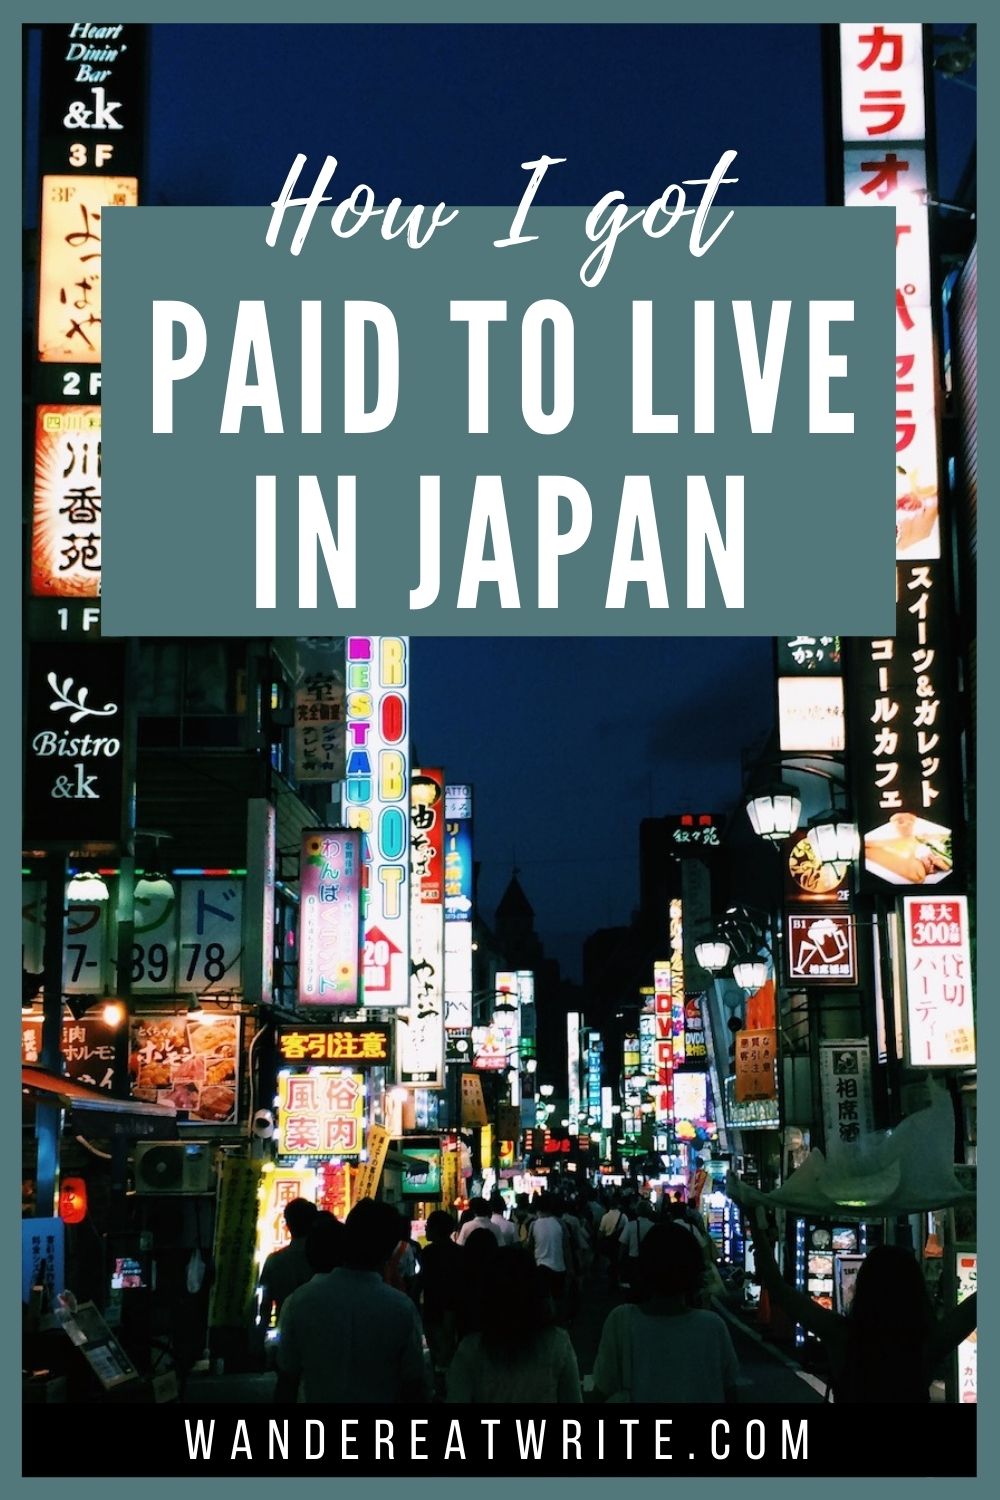 How I got paid to live in Japan